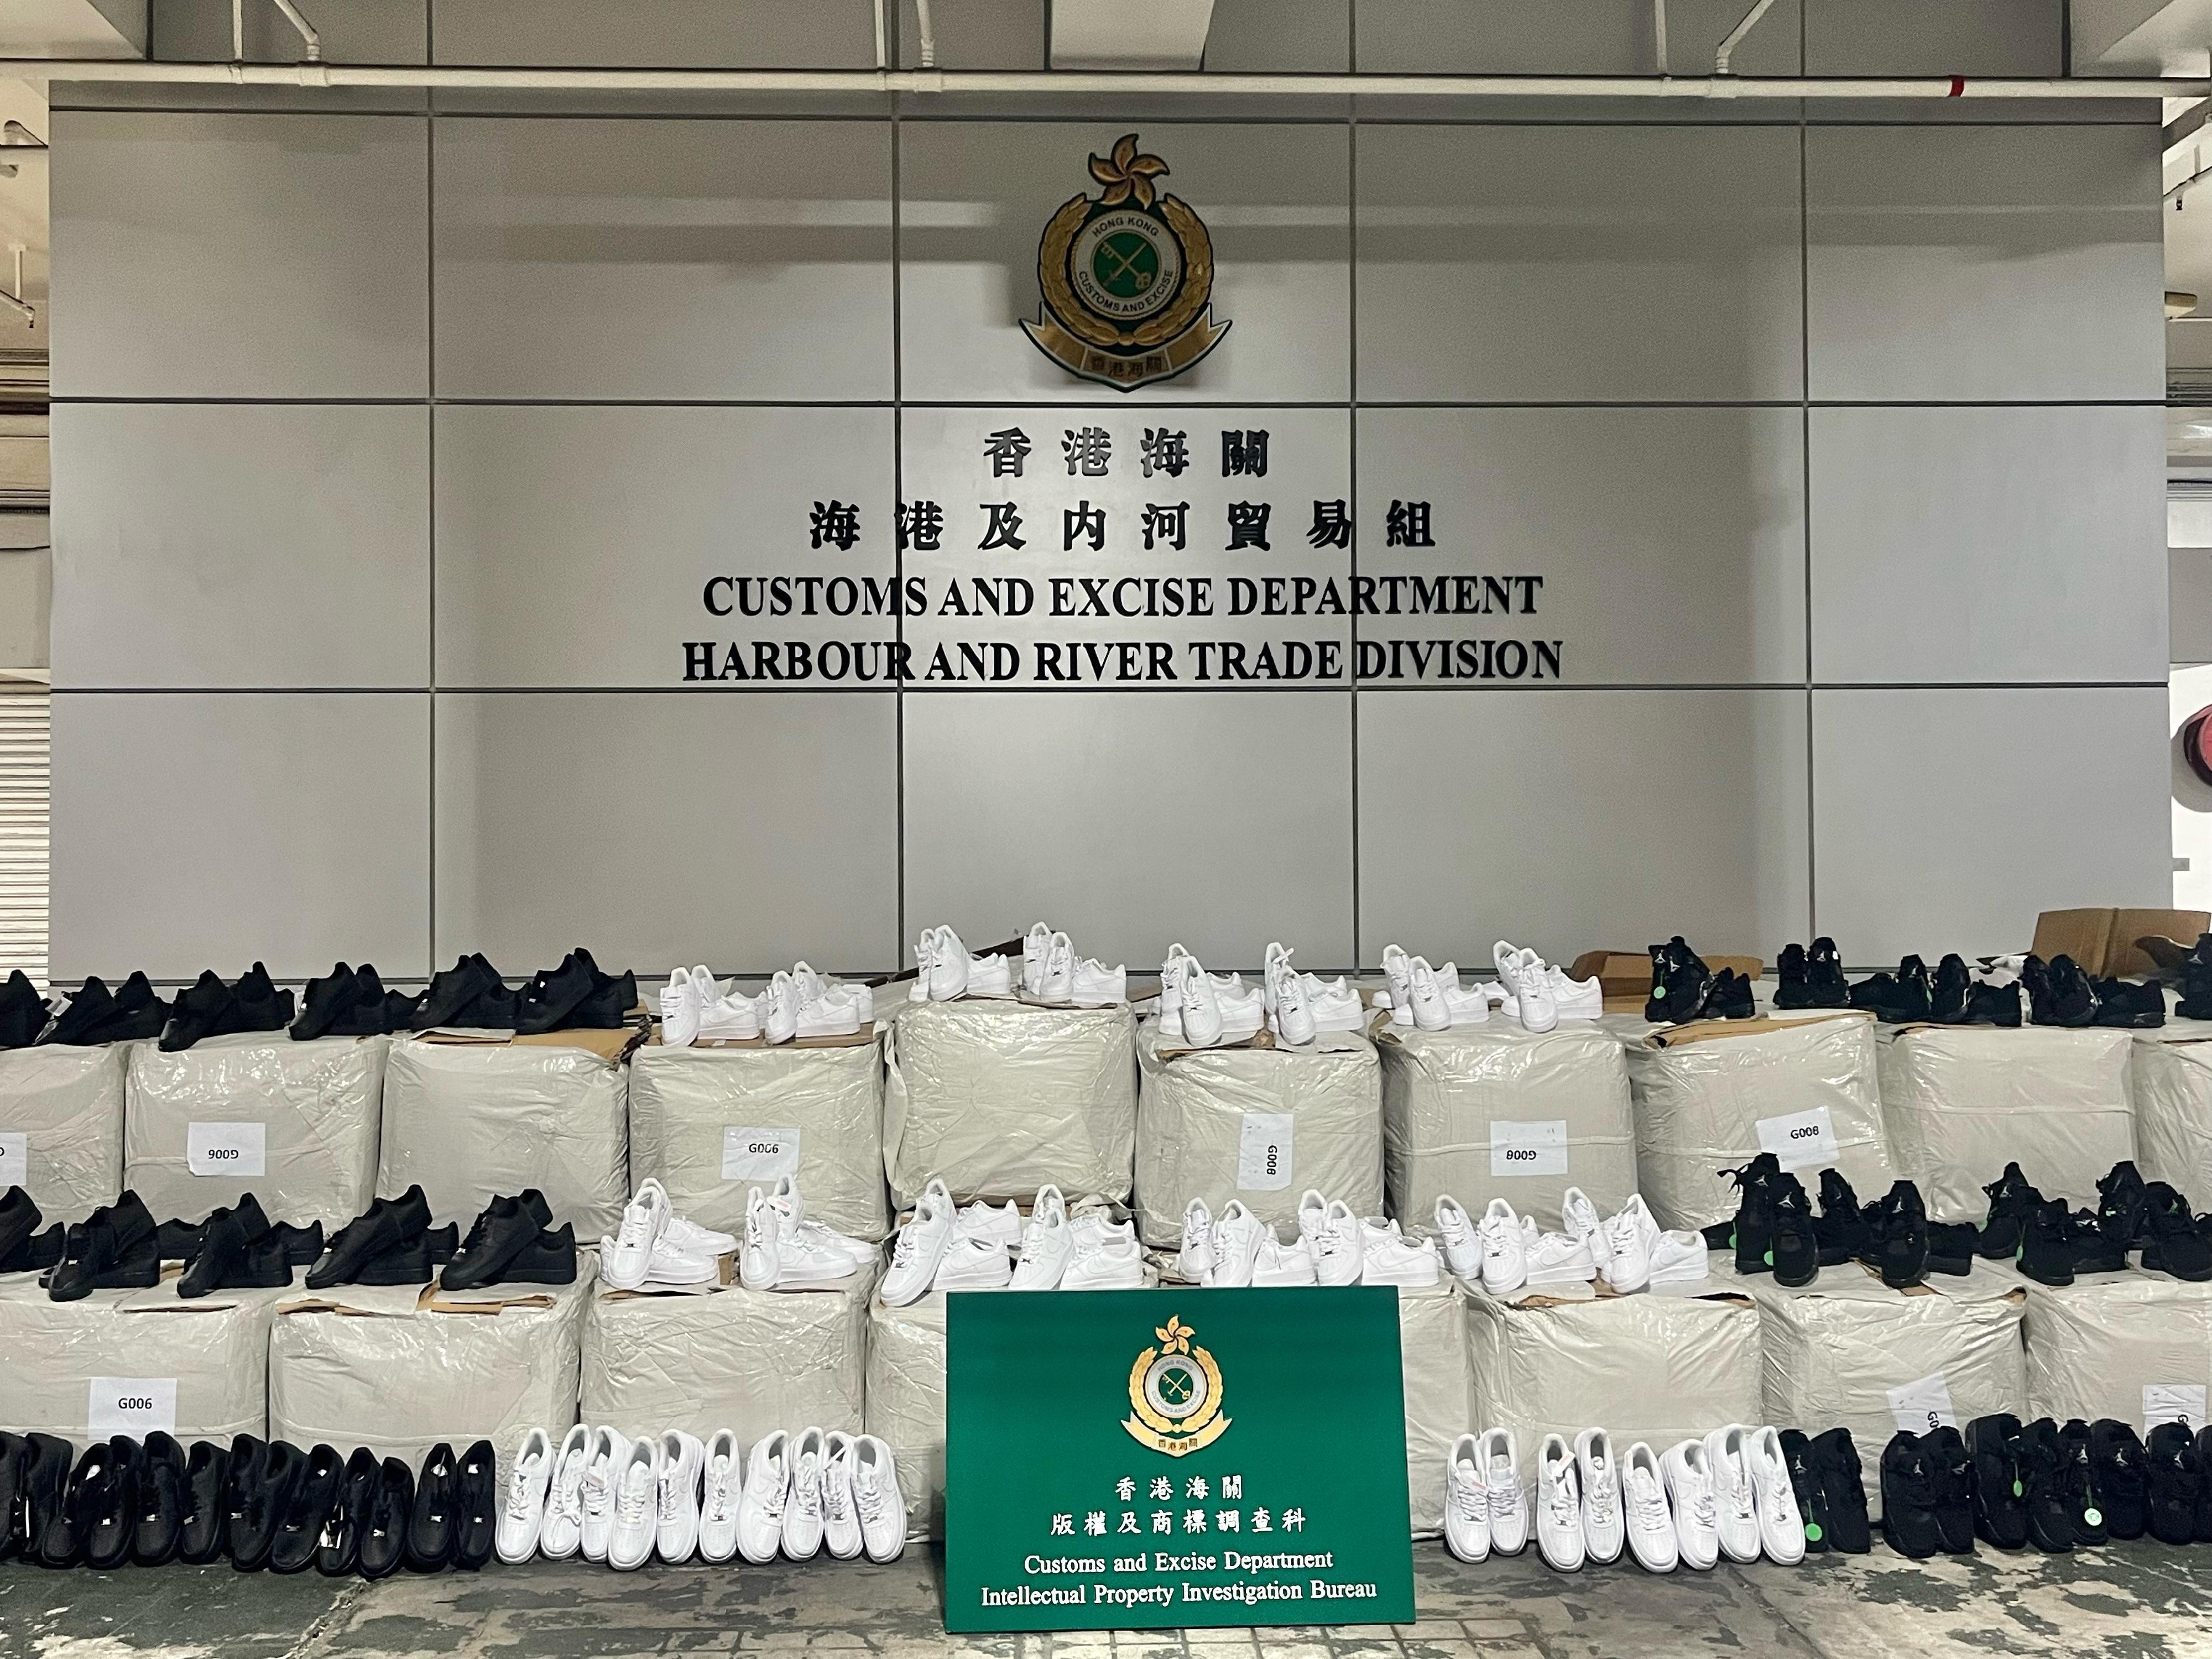 Hong Kong Customs on November 24 seized about 10 000 pairs of suspected counterfeit sports shoes with an estimated market value of about $3.6 million at the Tuen Mun River Trade Terminal Customs Cargo Examination Compound. Photo shows some of the suspected counterfeit sports shoes seized.